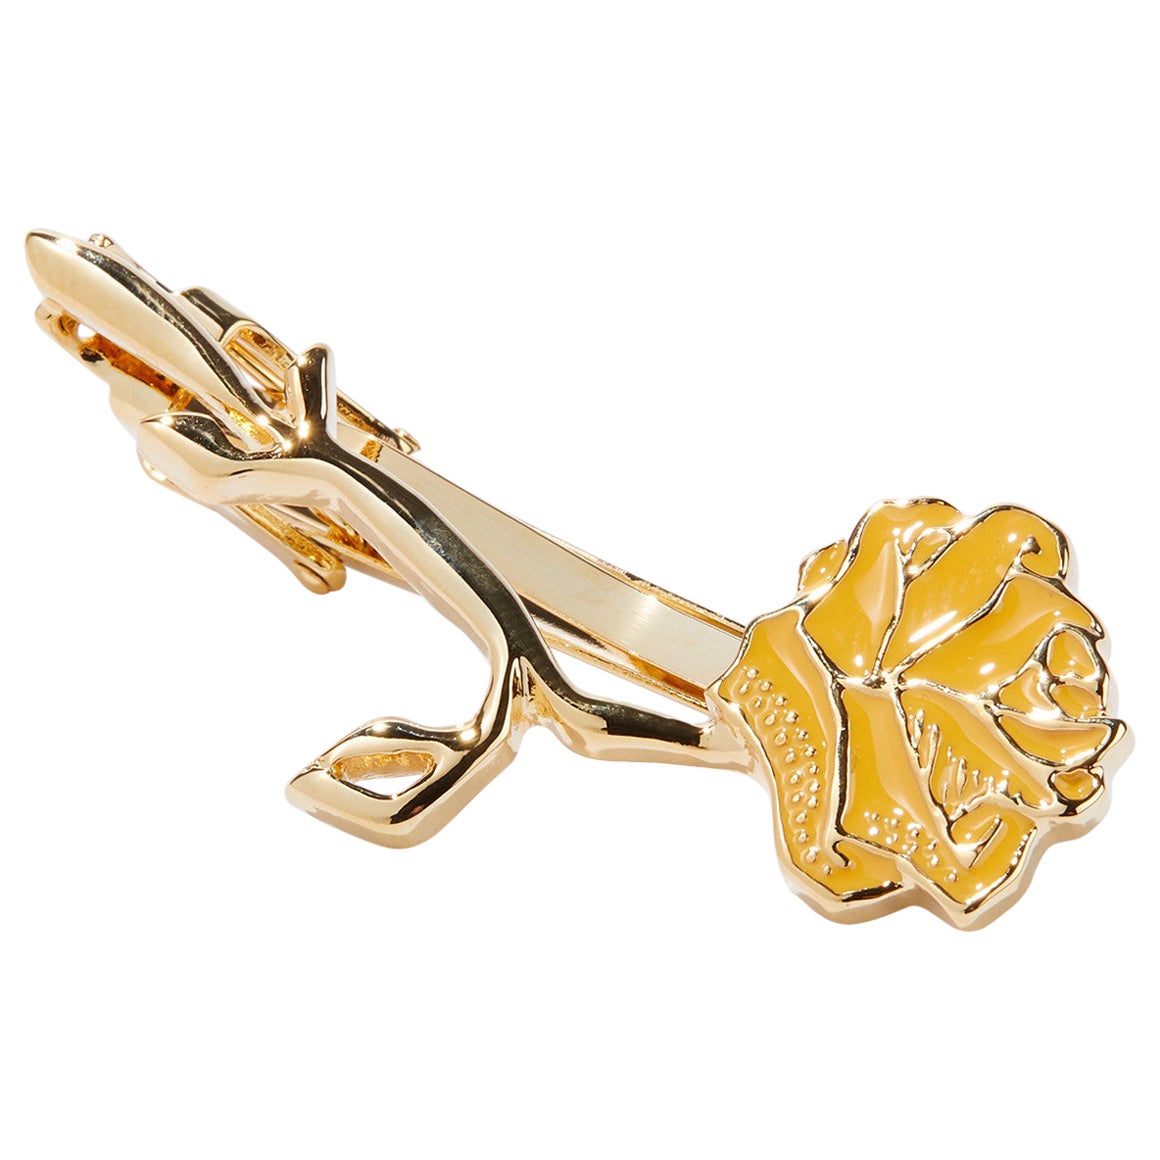 Goldenrod Gift, Glossy Lacquer Finish Tie Clip Dipped in 24k Gold For Sale